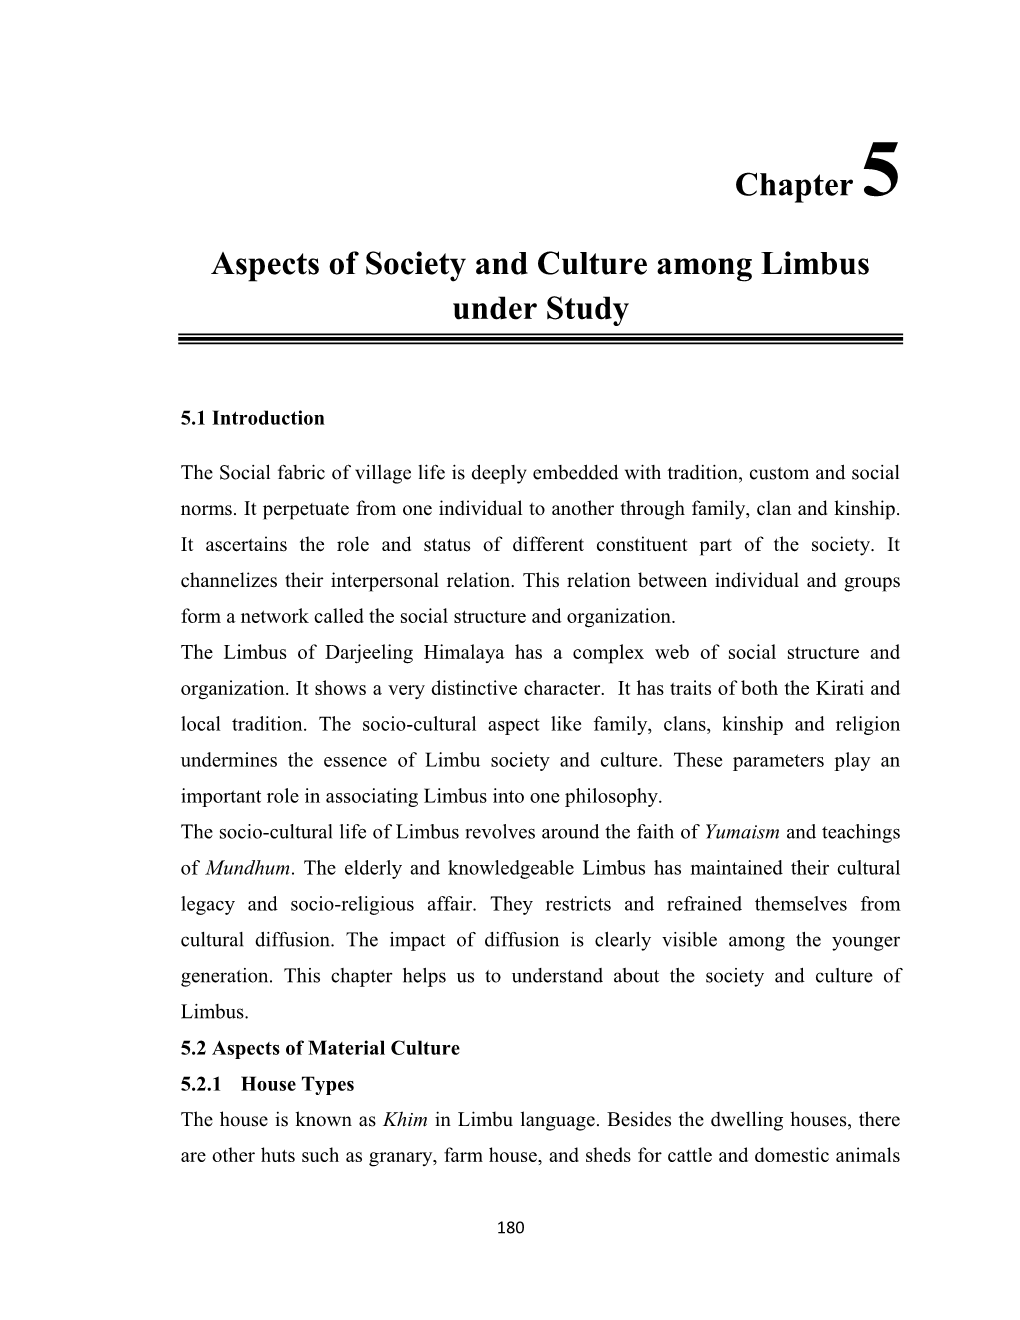 Chapter 5 Aspects of Society and Culture Among Limbus Under Study